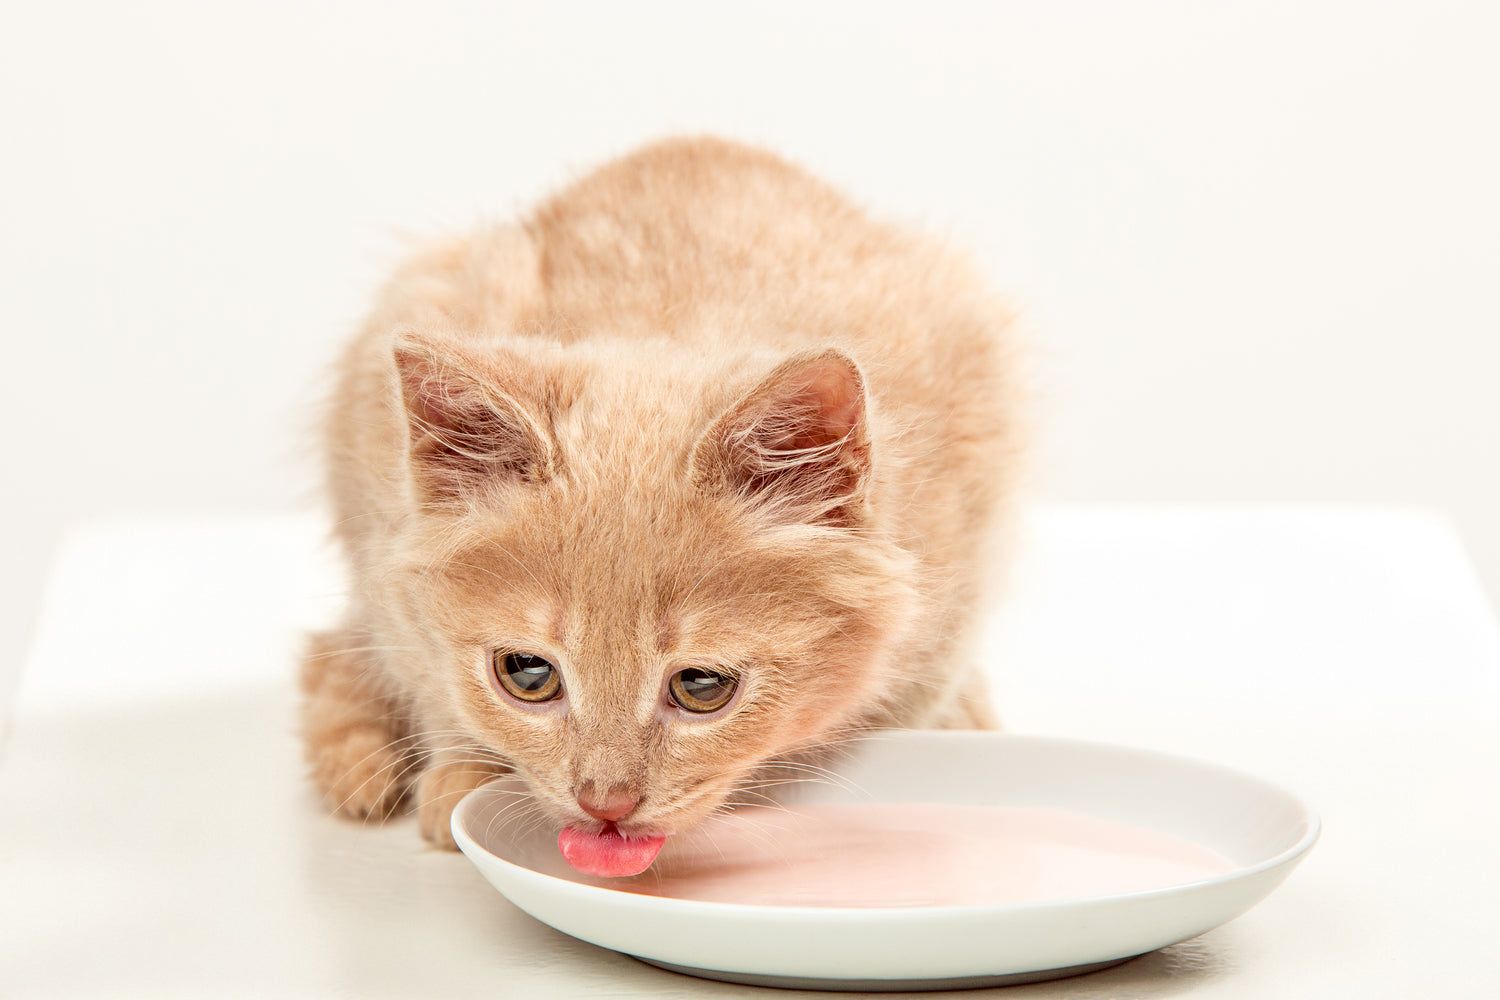 A Basic Guide to Human Food for Cats: What's Safe and What to Avoid